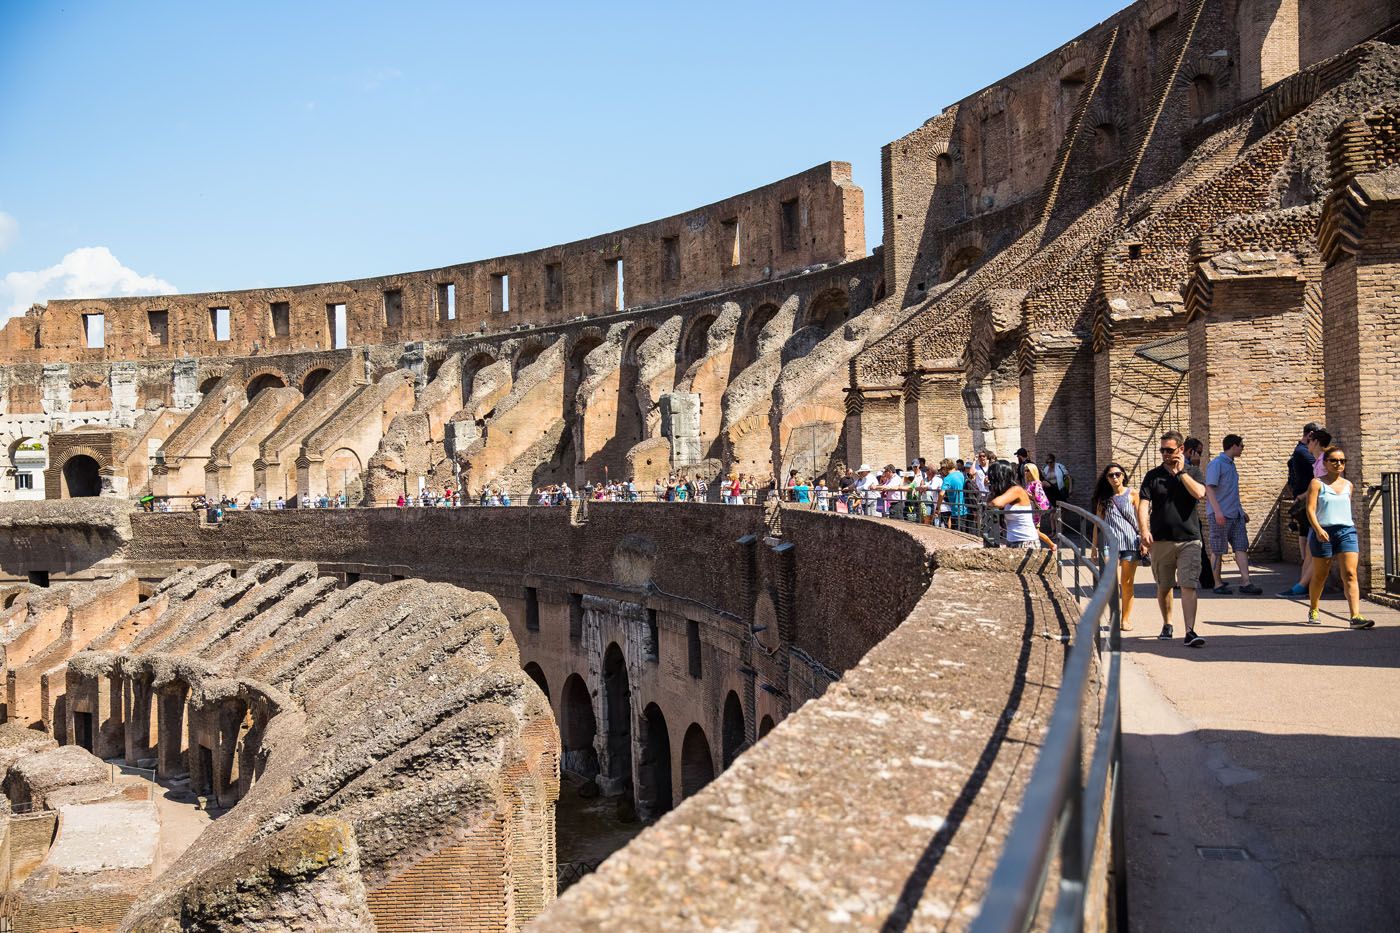 Colosseum Second Level | How to Visit the Colosseum